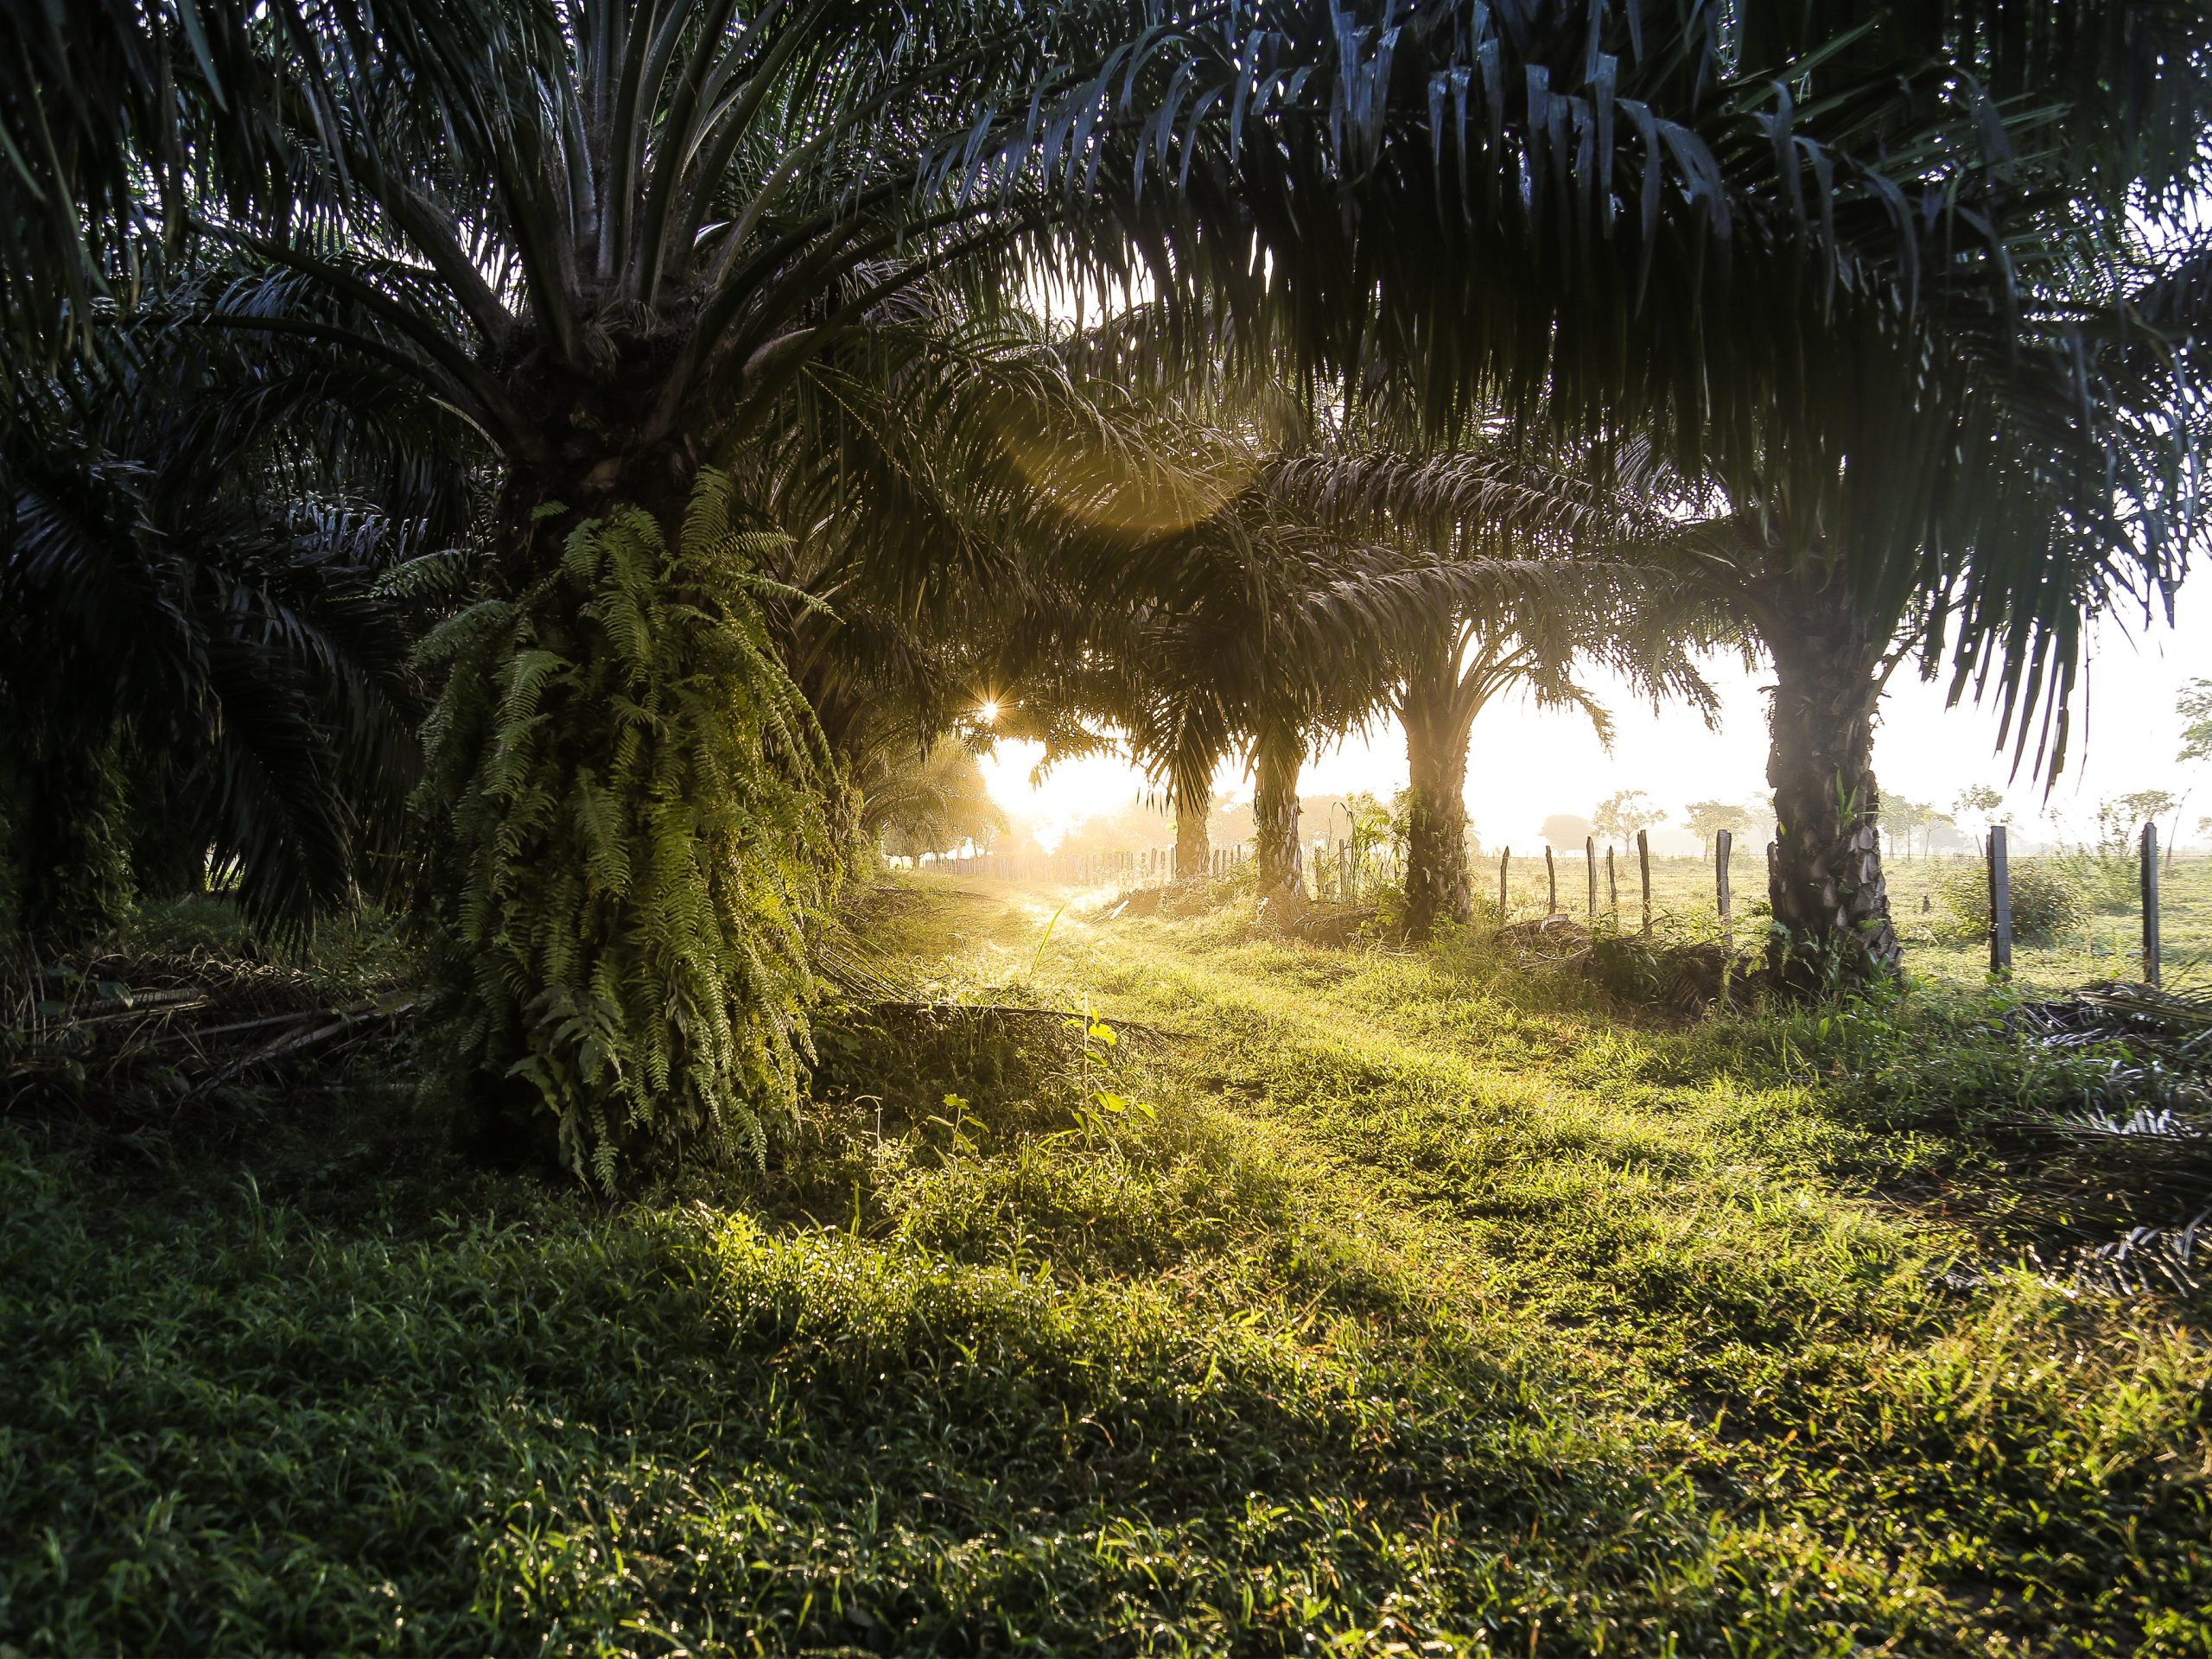 Ecometrica and FEMEXPALMA Join to Support the Sustainable Growth of Mexican Palm Oil Industry